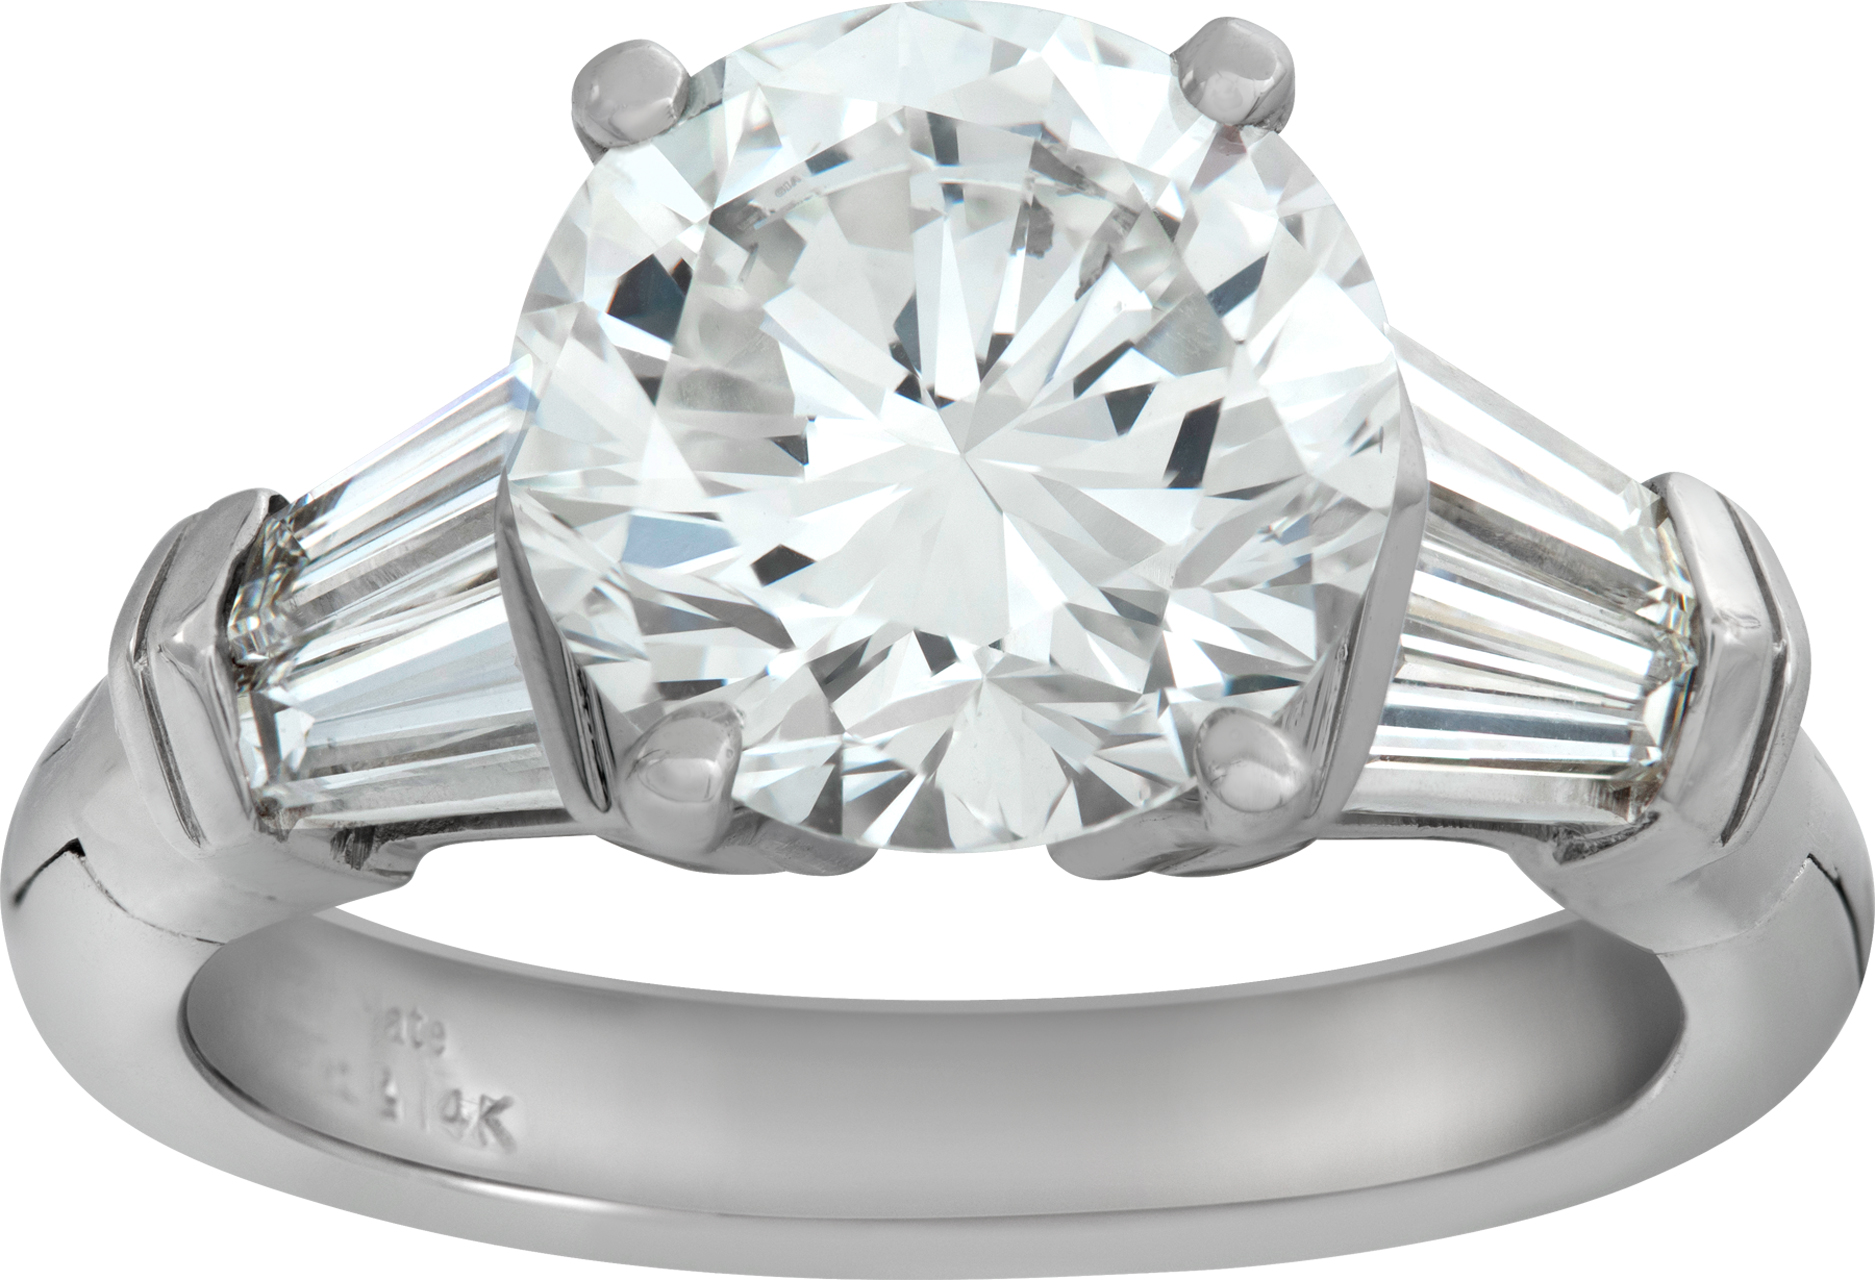 GIA Certified round brilliant cut 3.09 carat diamond, H Color, VS2 clarity set on a "FINGER MATE" platinum & 14K white gold setting with 4 tapered baguettes image 1